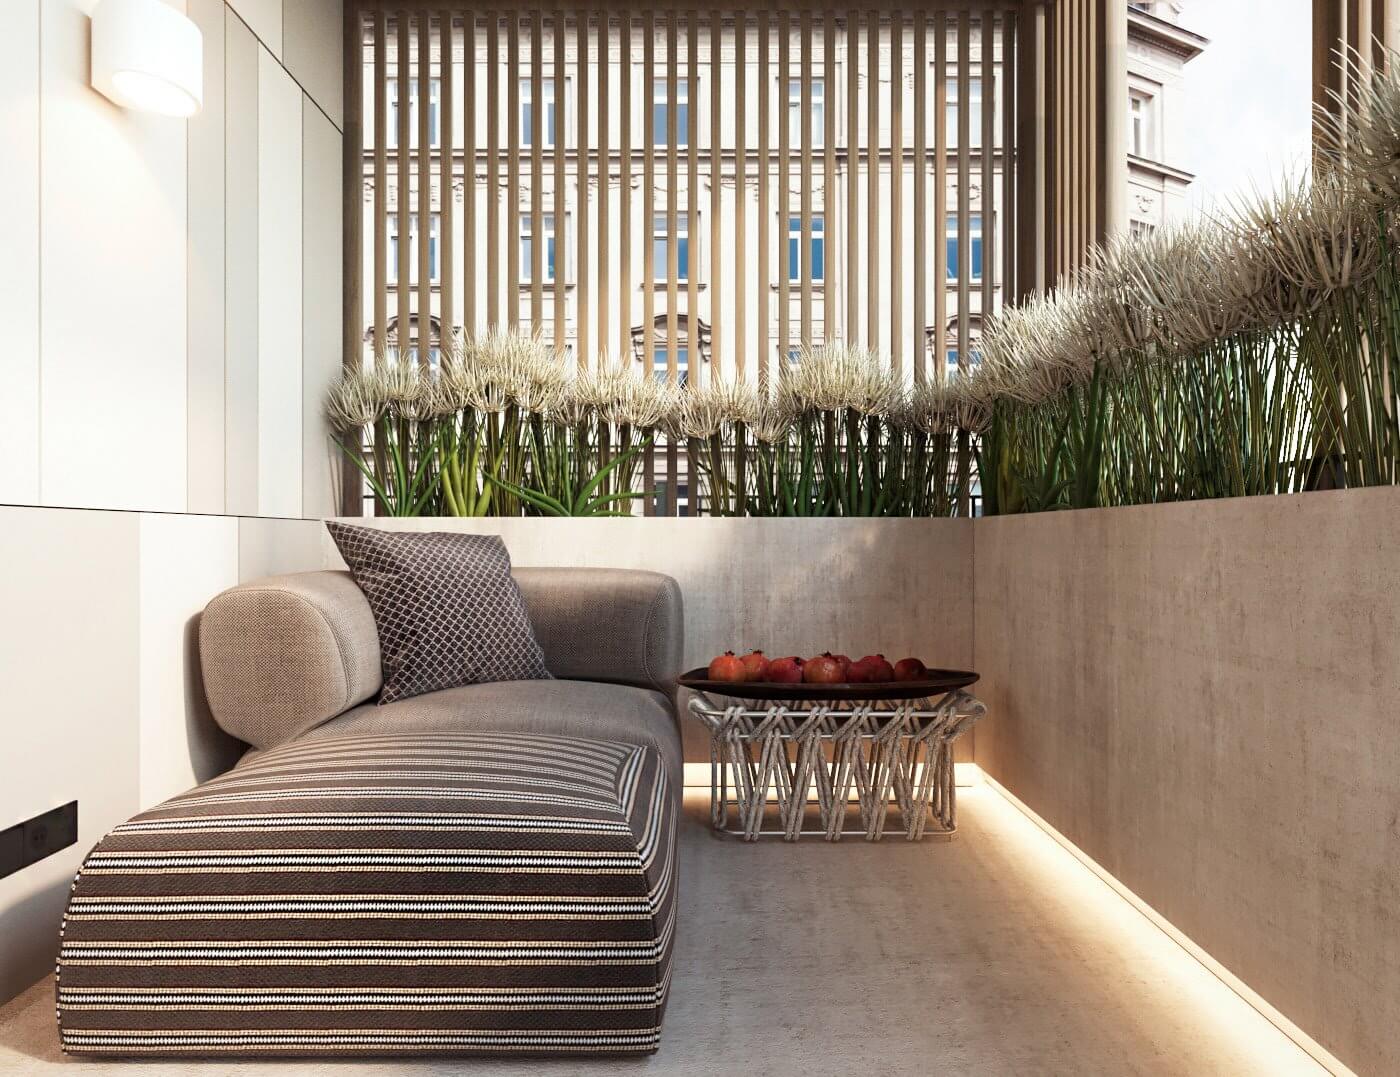 Apartment for a young family terrace - cgi visualization